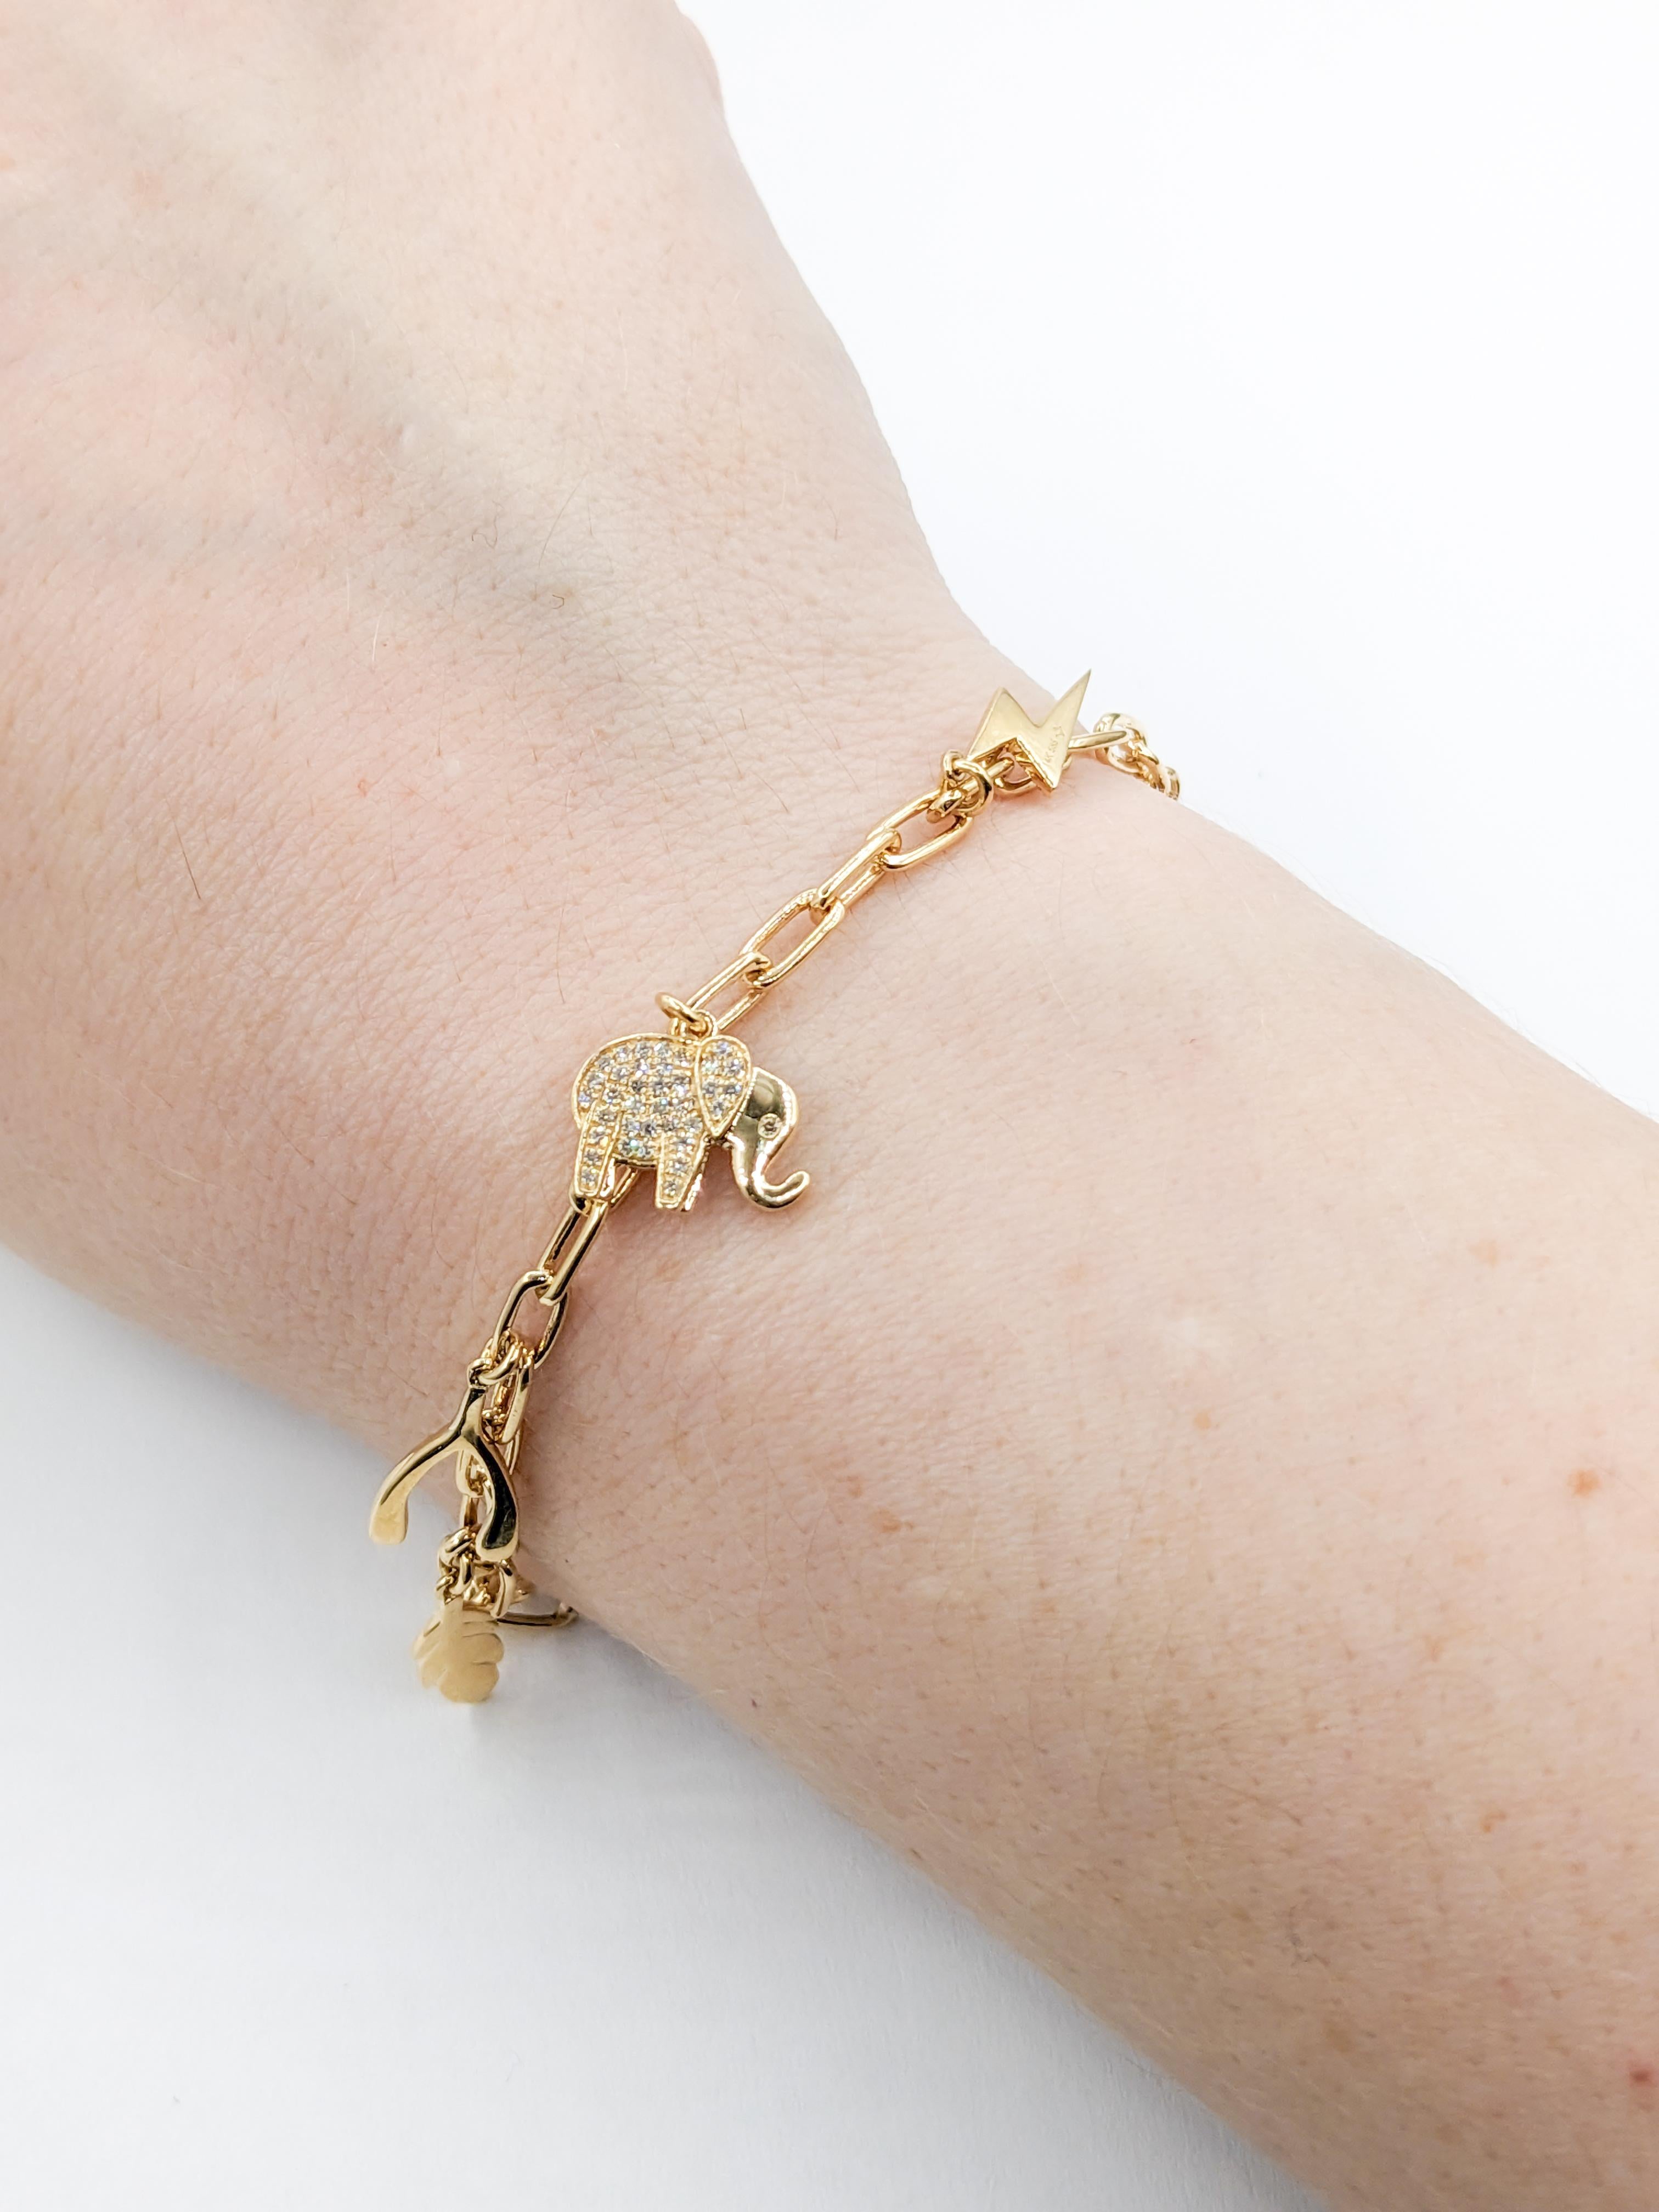 Majolie Collections Diamond Lucky Charm Bracelet

Step into a world of elegance with this bracelet, impeccably fashioned in the warm tones of 14k yellow gold. Nestled within its designs lie .50ctw of round diamonds, radiating brilliance with their